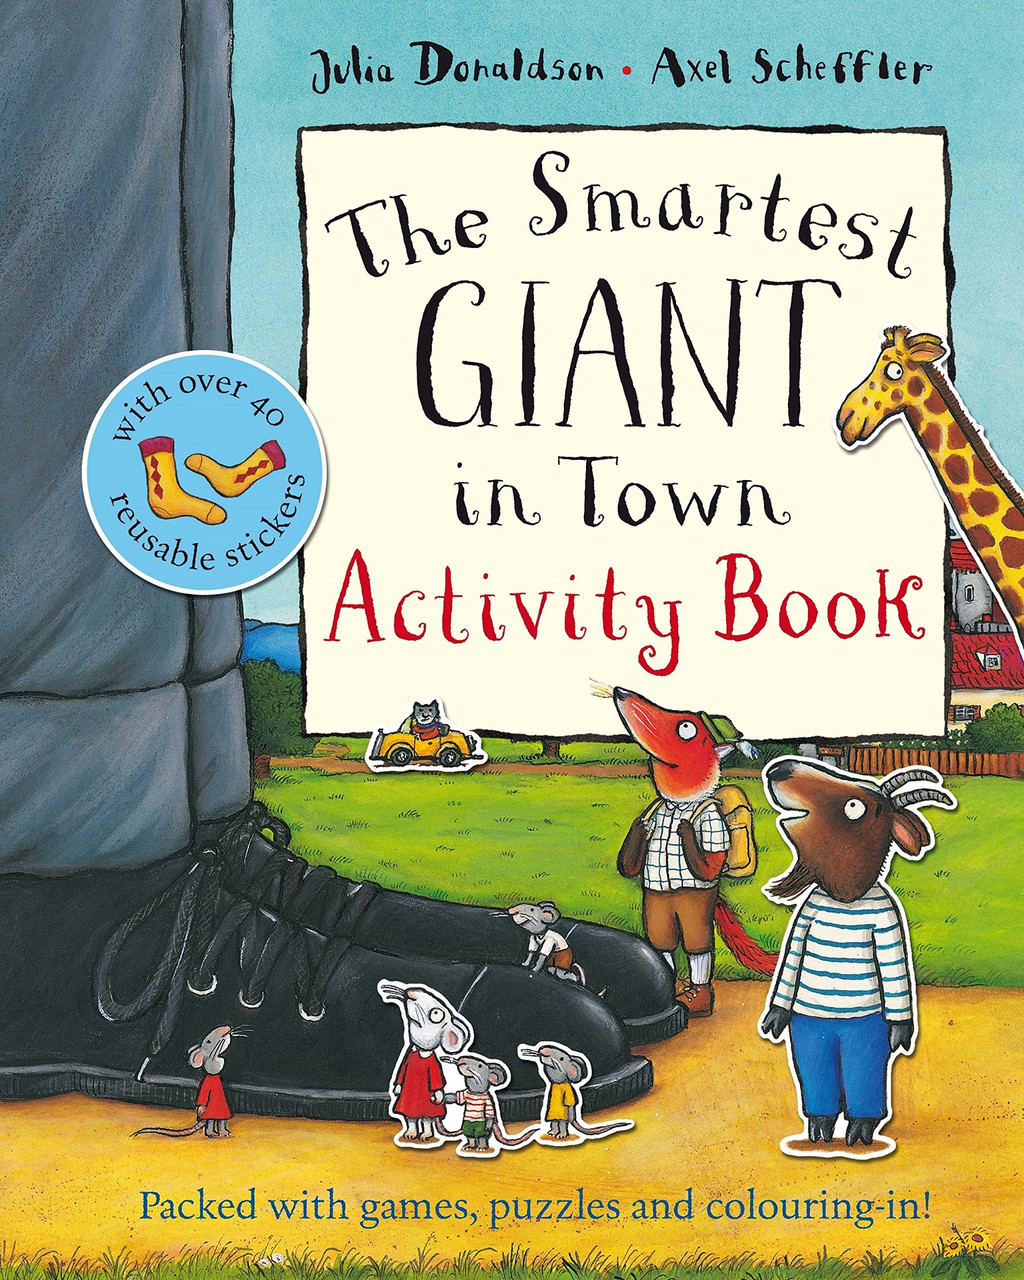 THE SMARTEST GIANT ACTIVITY BOOK